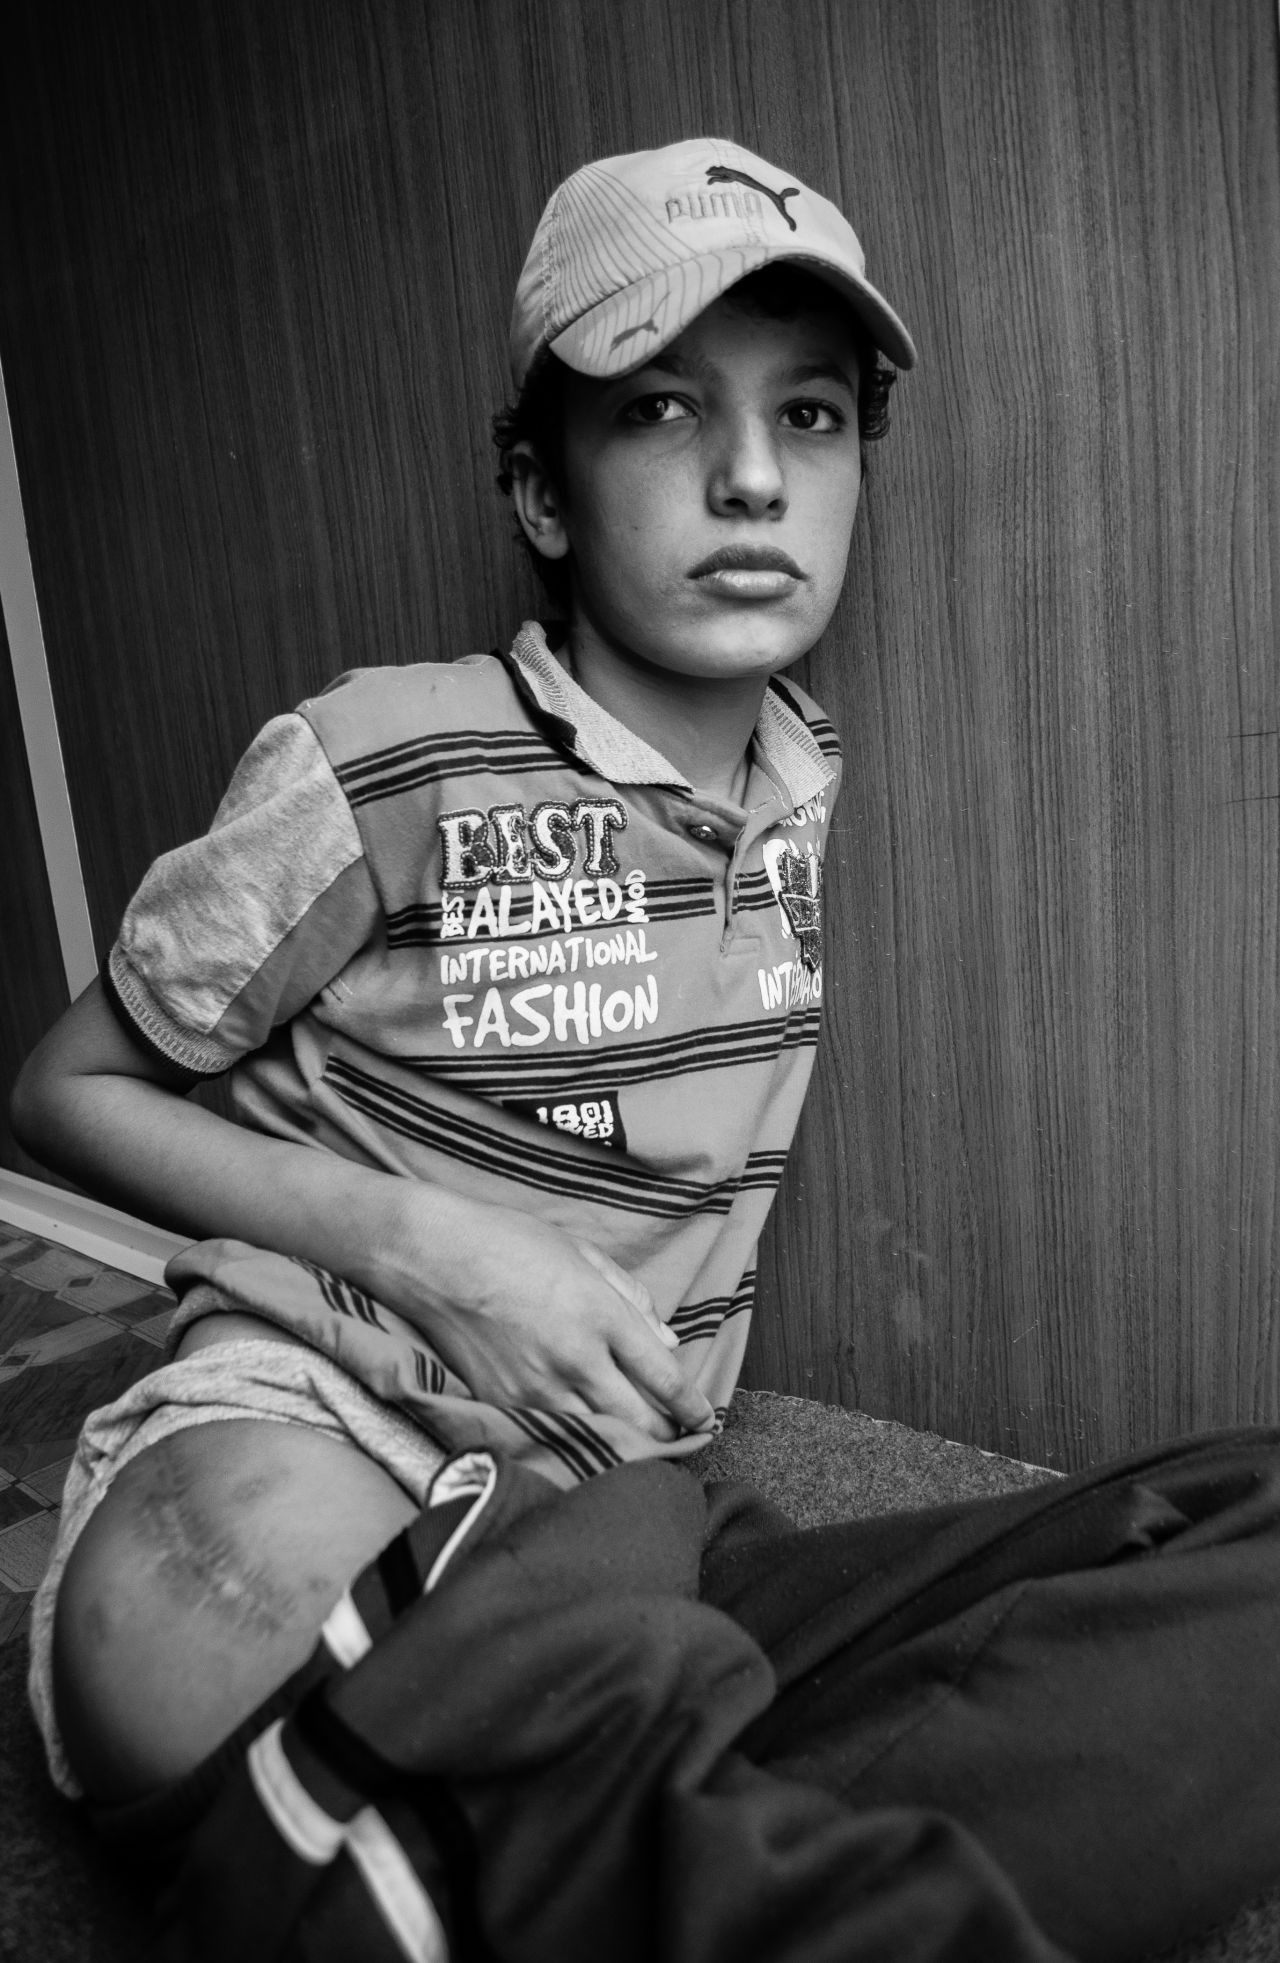 15-year-old Ahmed shows the shrapnel wound on his leg. His mother was killed during the incident.